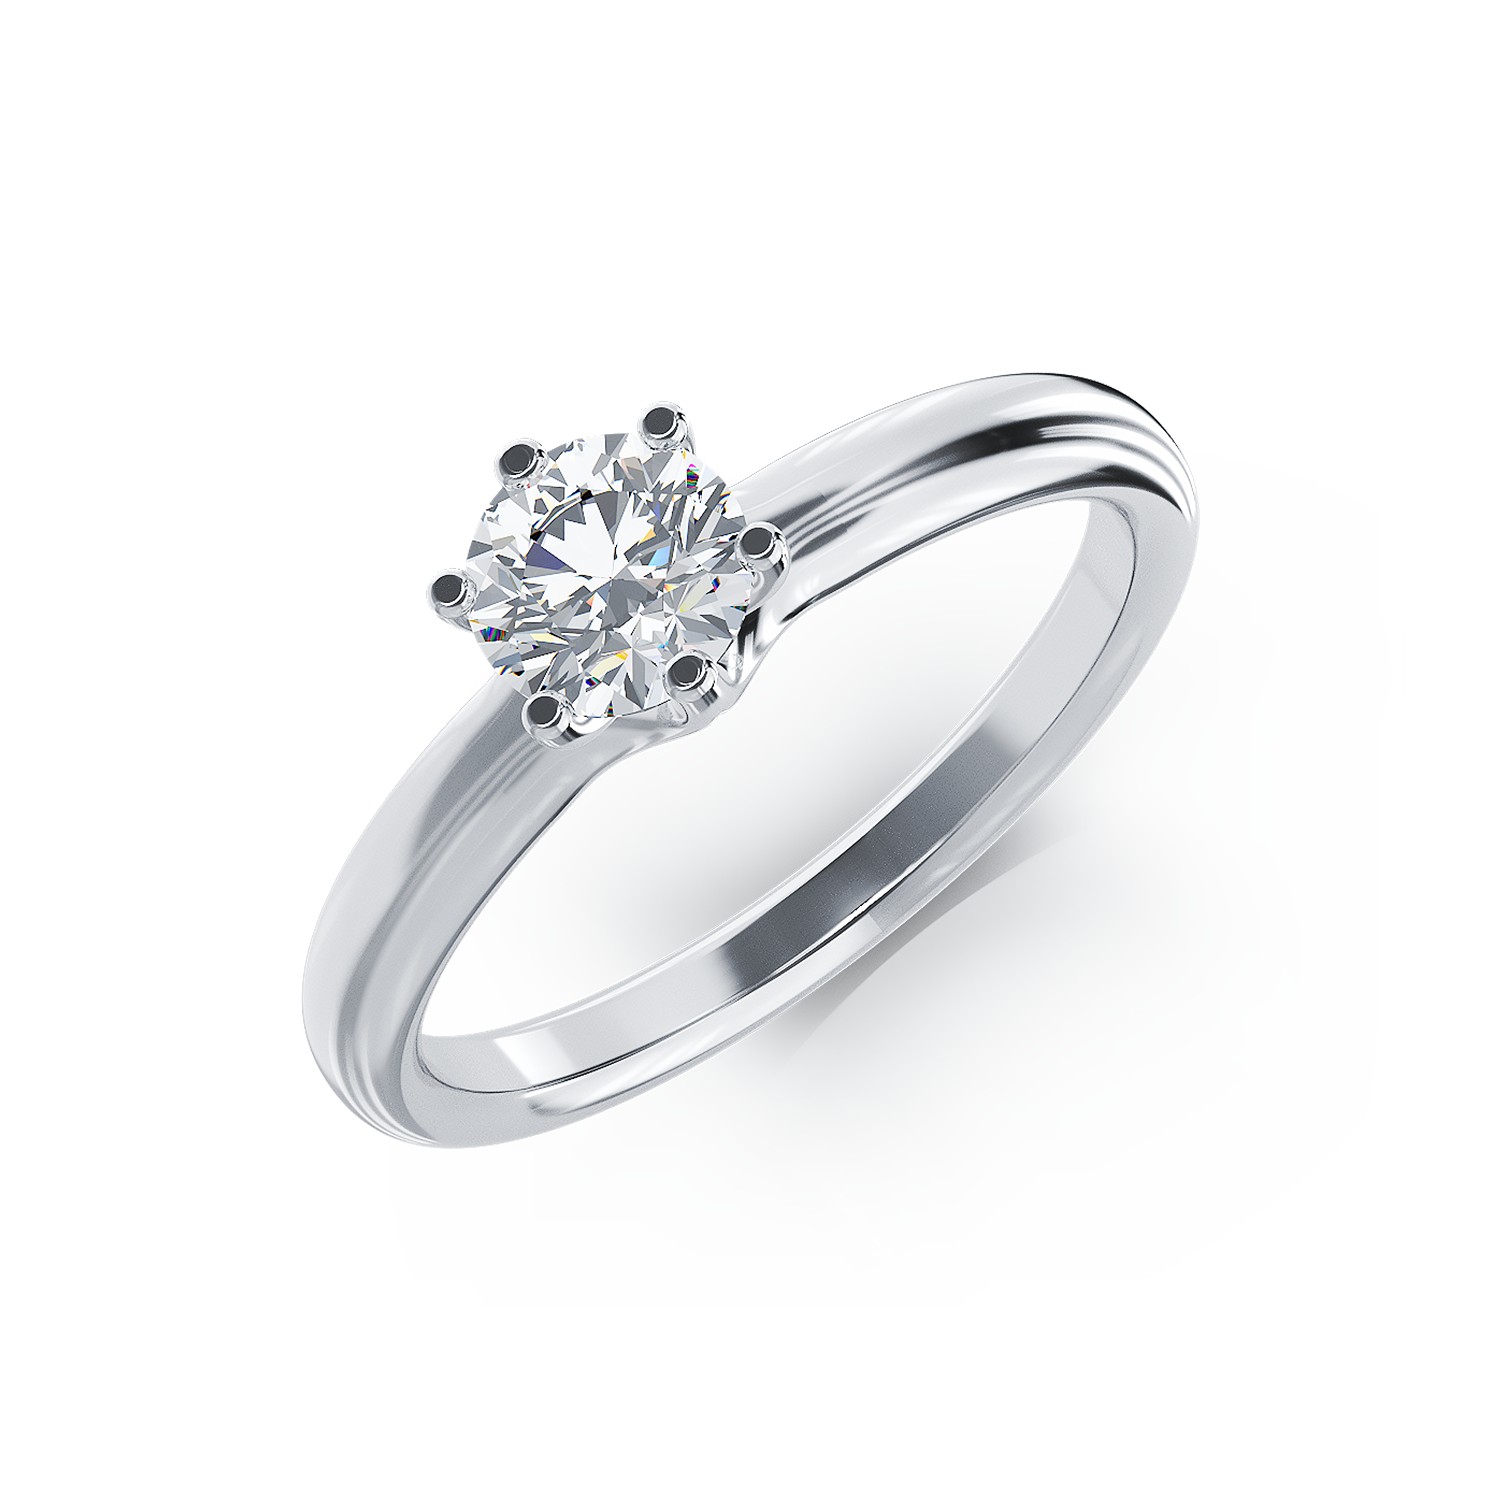 18K white gold engagement ring with a 0.6ct solitaire diamond